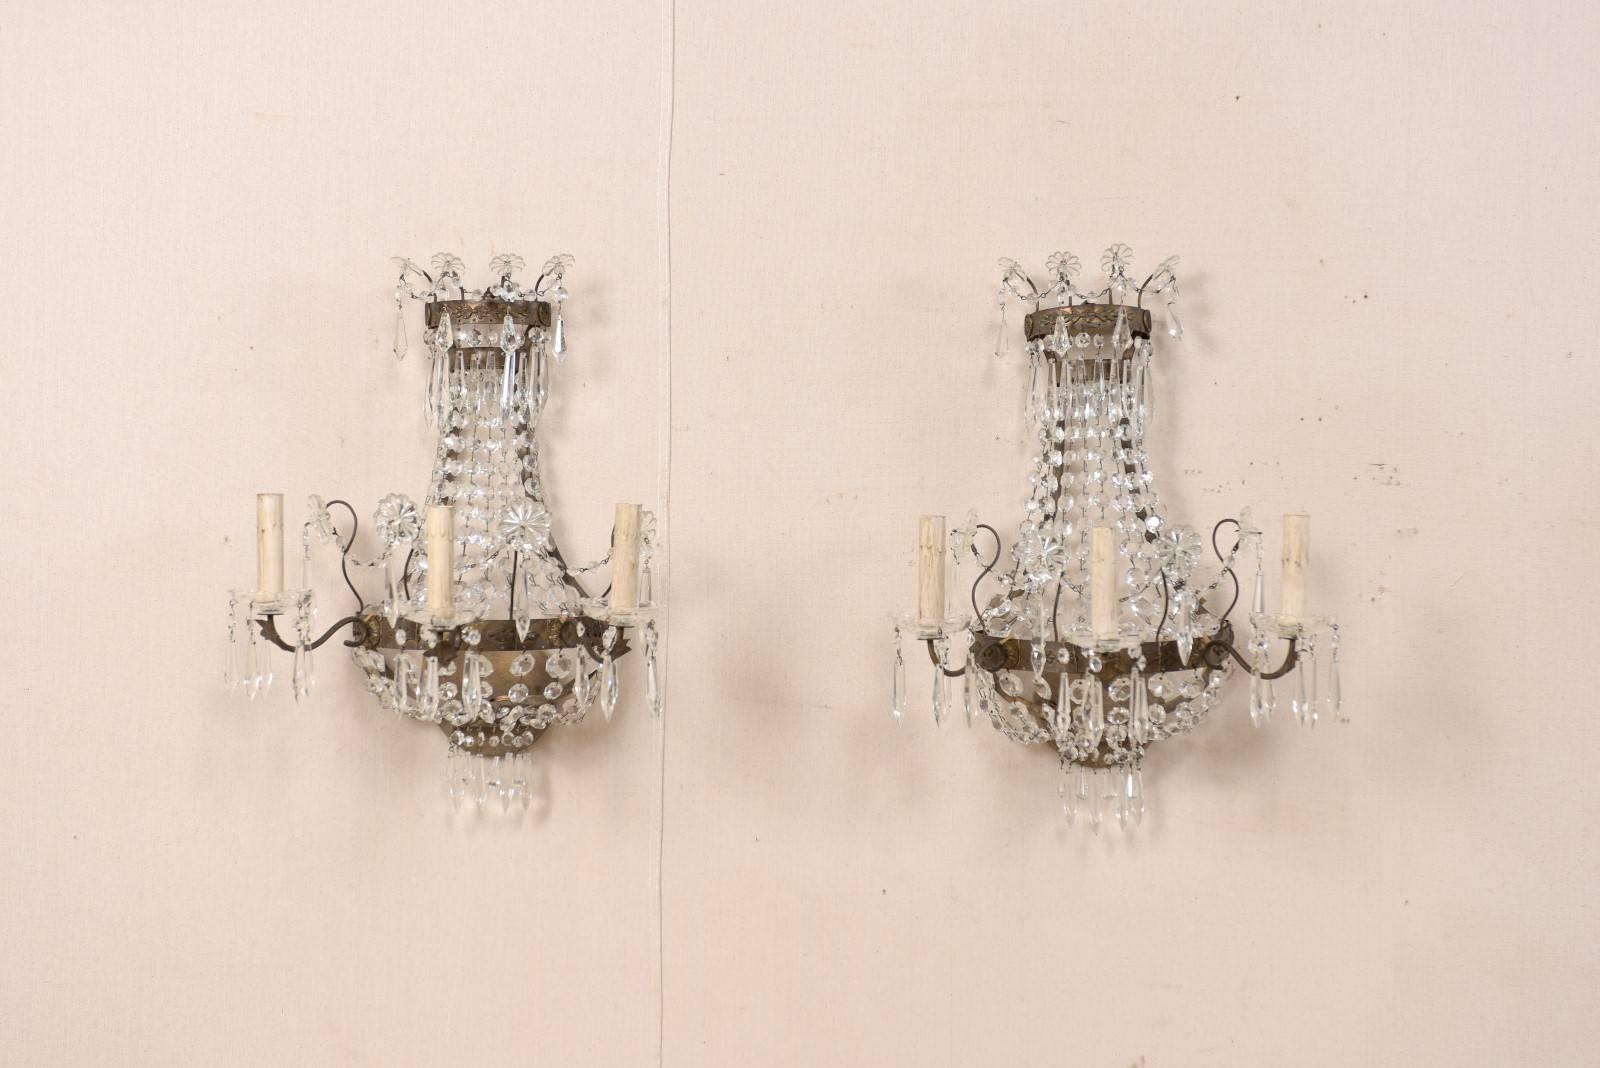 A pair of Swedish three-light crystal and cut-glass wall sconces from the mid-20th century. This pair of vintage wall candelabras from Sweden each feature a frame of patinated bronze, an upper crown adorned with glass-cut flowers and crystals,